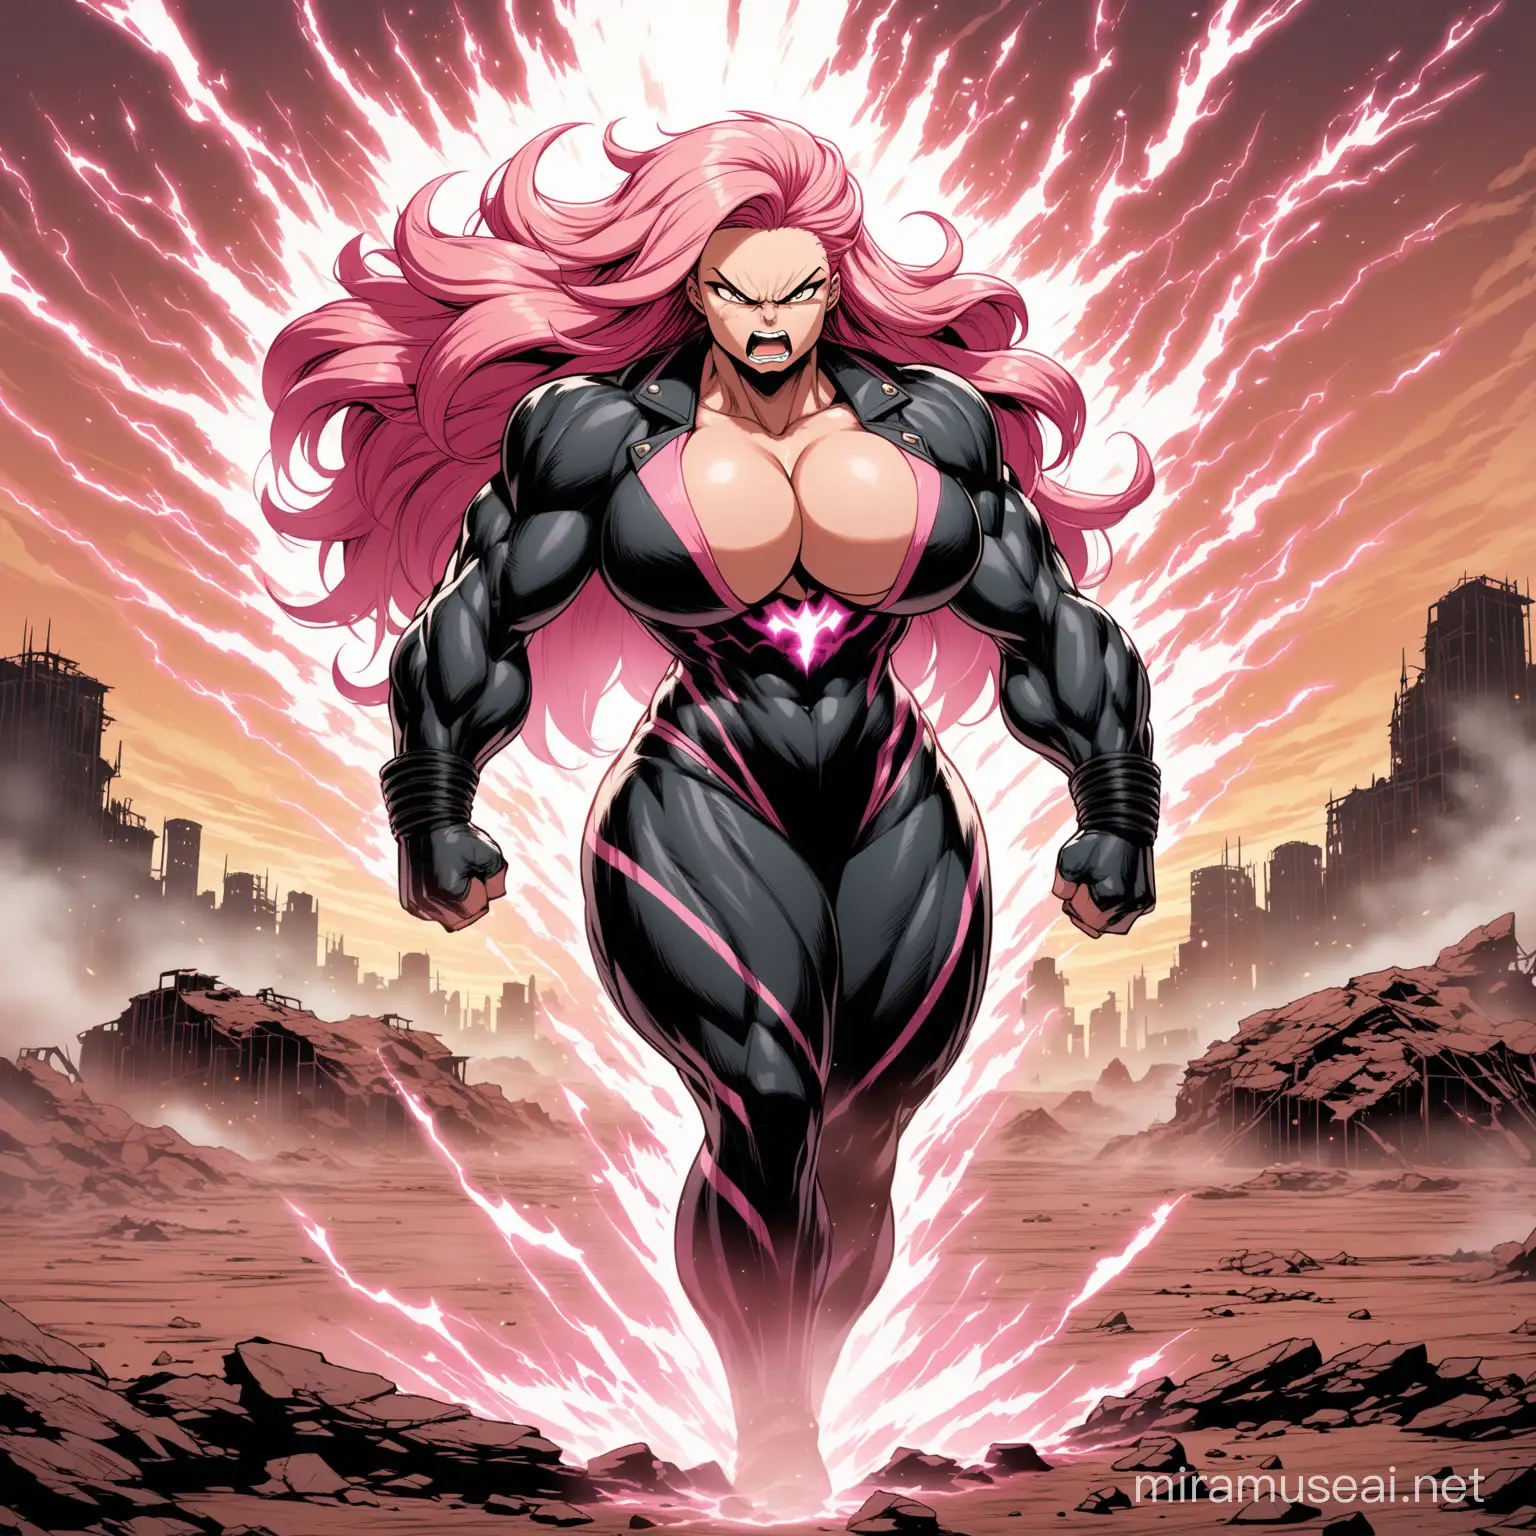 a sturdy, muscular, big, strong, peach-skinned, angry, infamous woman, black suit with pink edges, large breasts, robust butt, desolate wasteland, long fluffy pink hair, covered in an aura of power.
